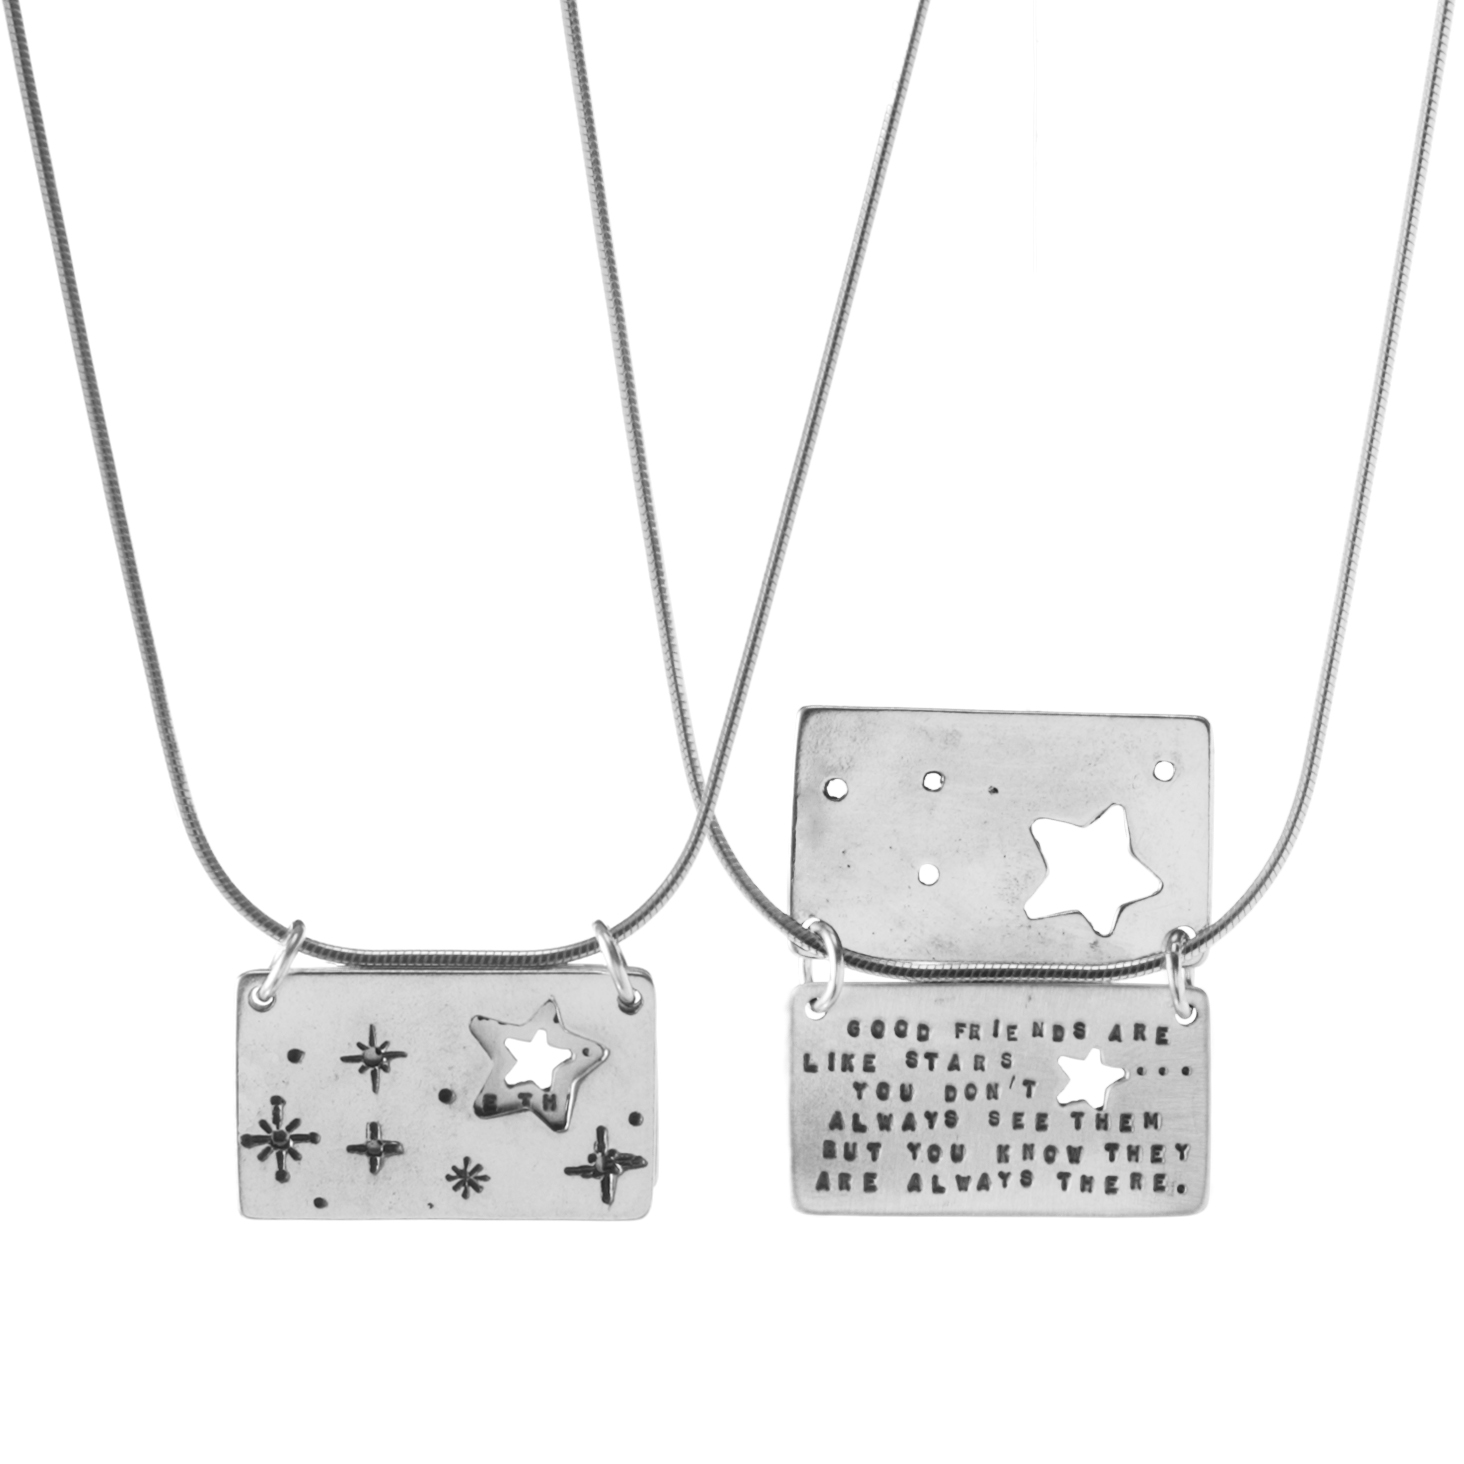 Starry Friends Necklace | UncommonGoods